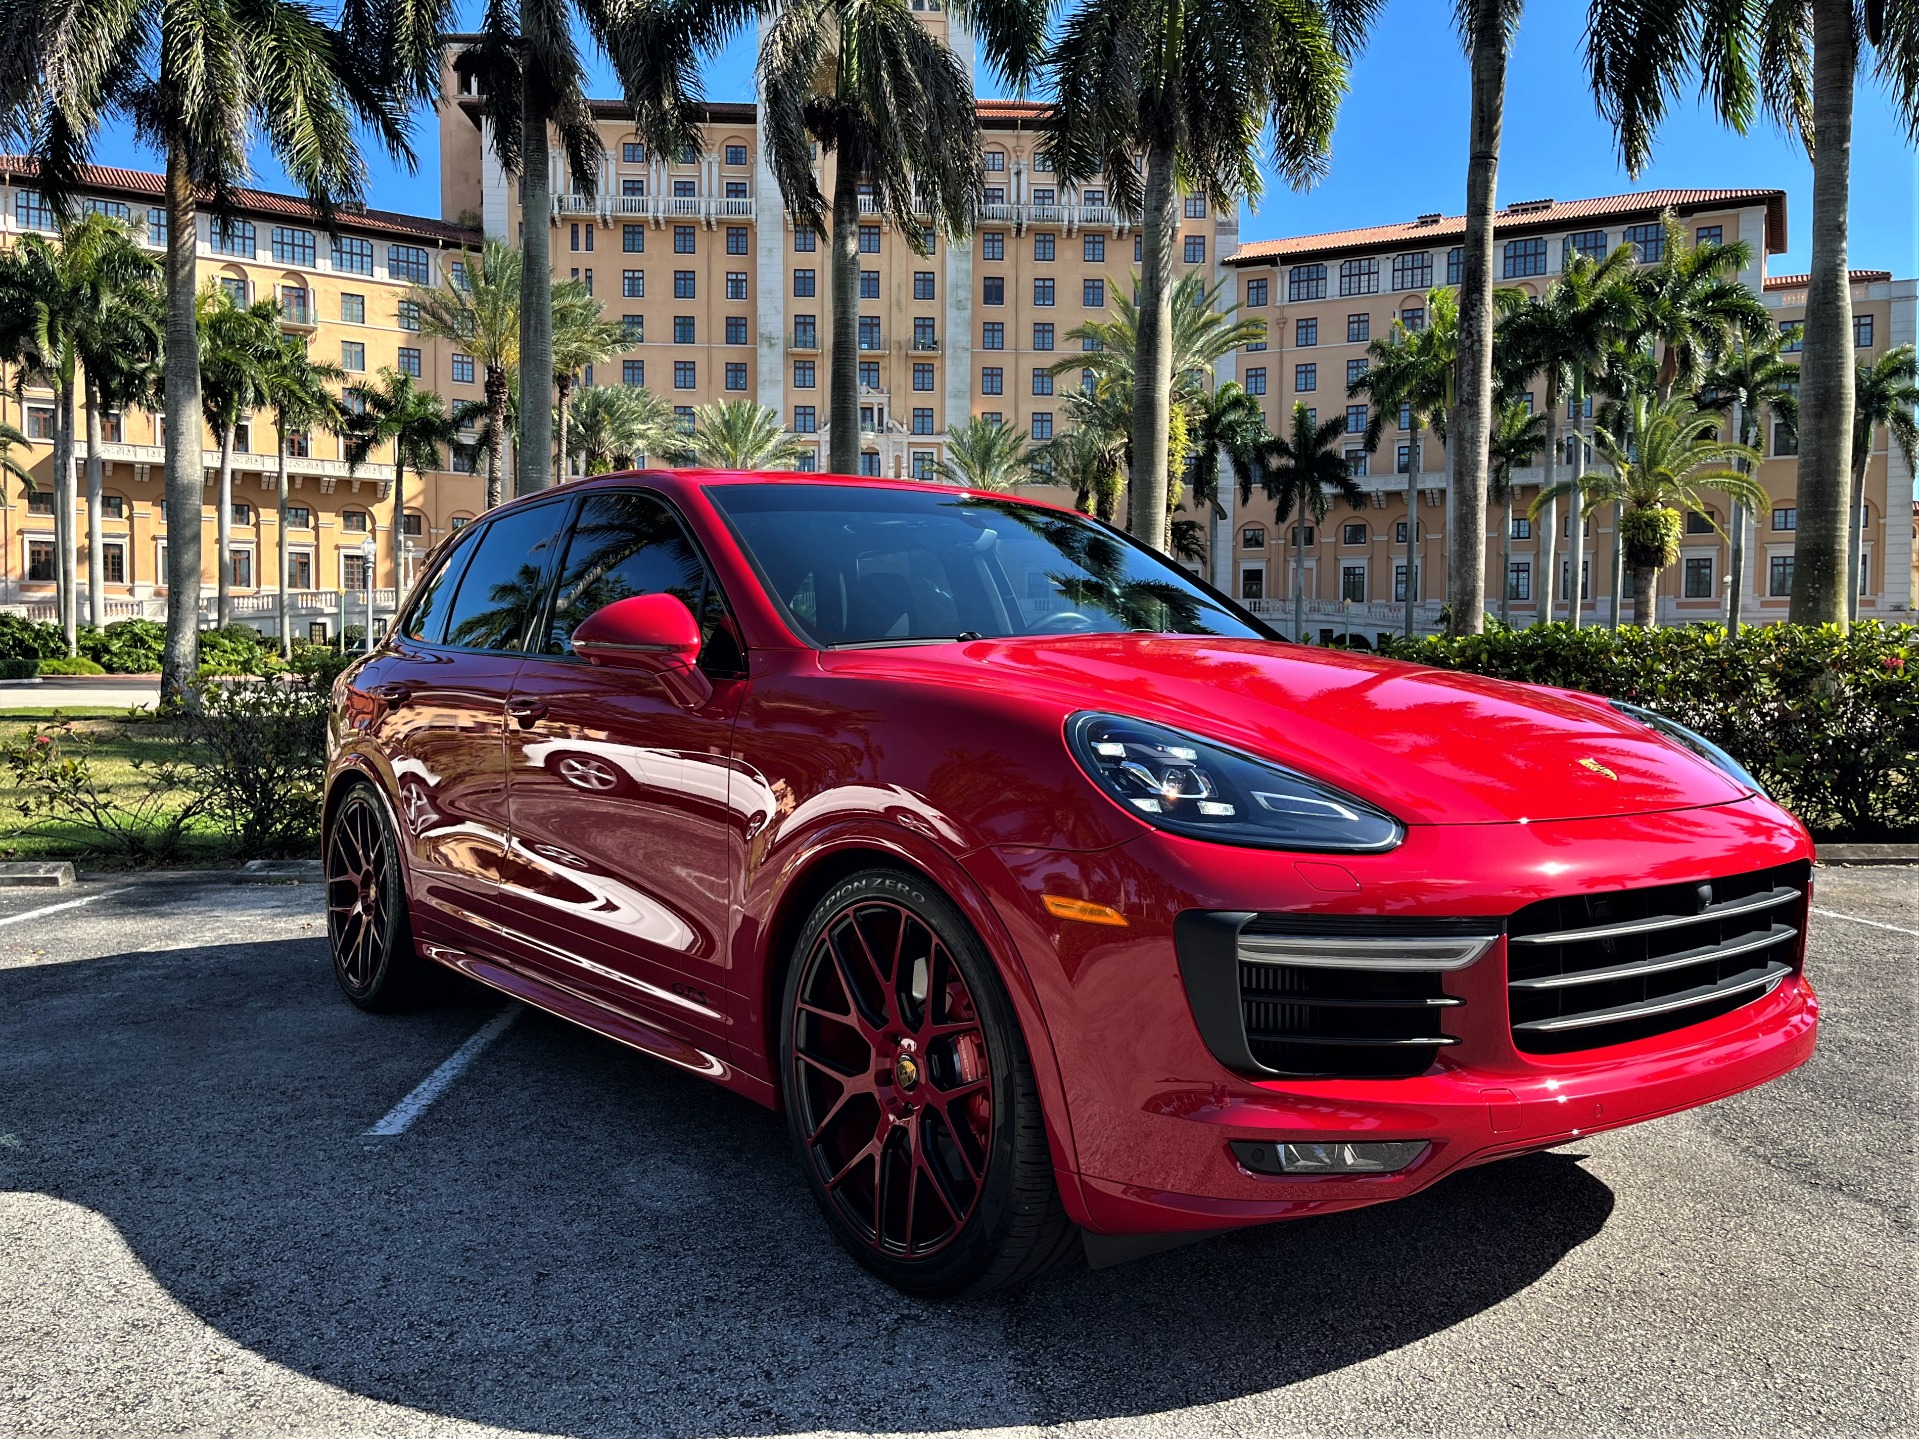 Used 2017 Porsche Cayenne GTS for sale Sold at The Gables Sports Cars in Miami FL 33146 2